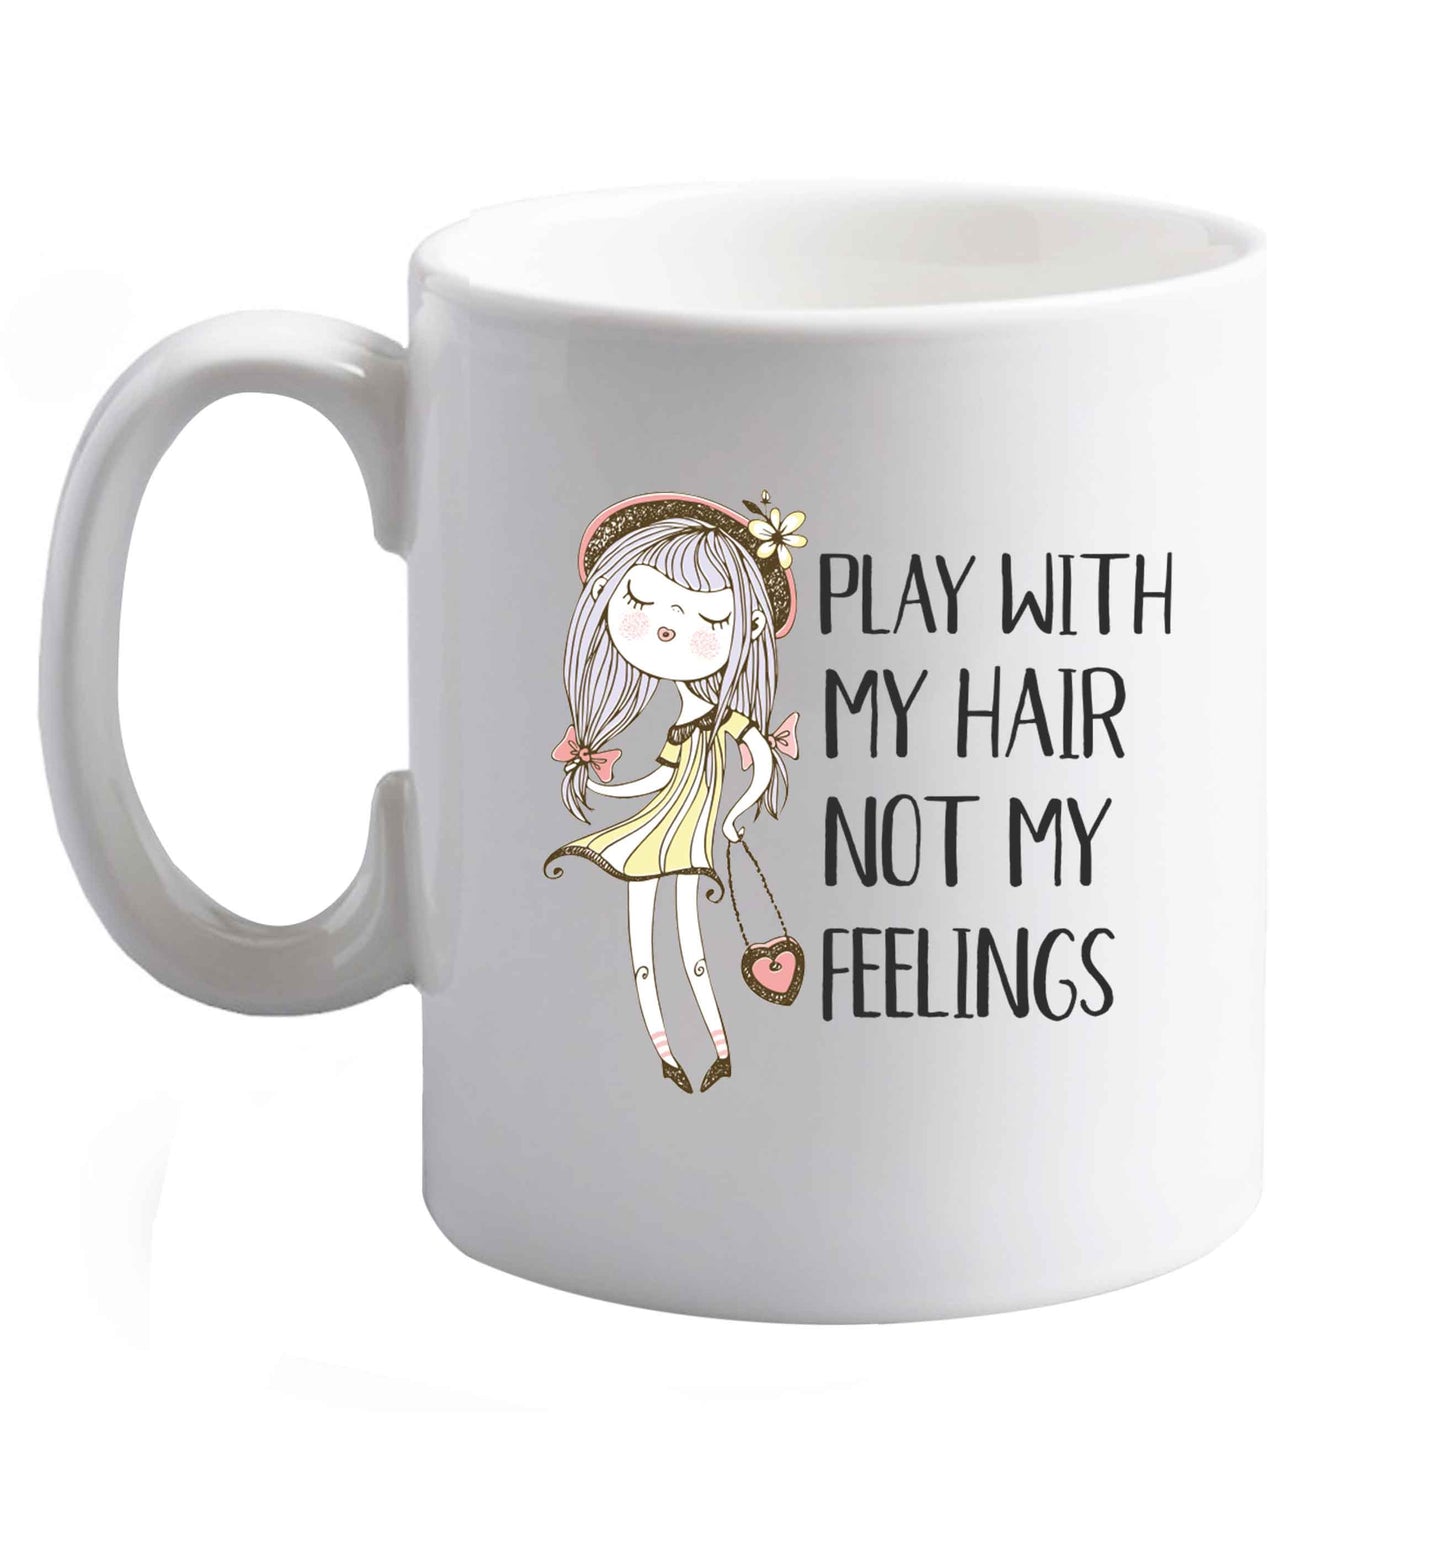 10 oz Play with my hair not my feelings illustration  ceramic mug right handed